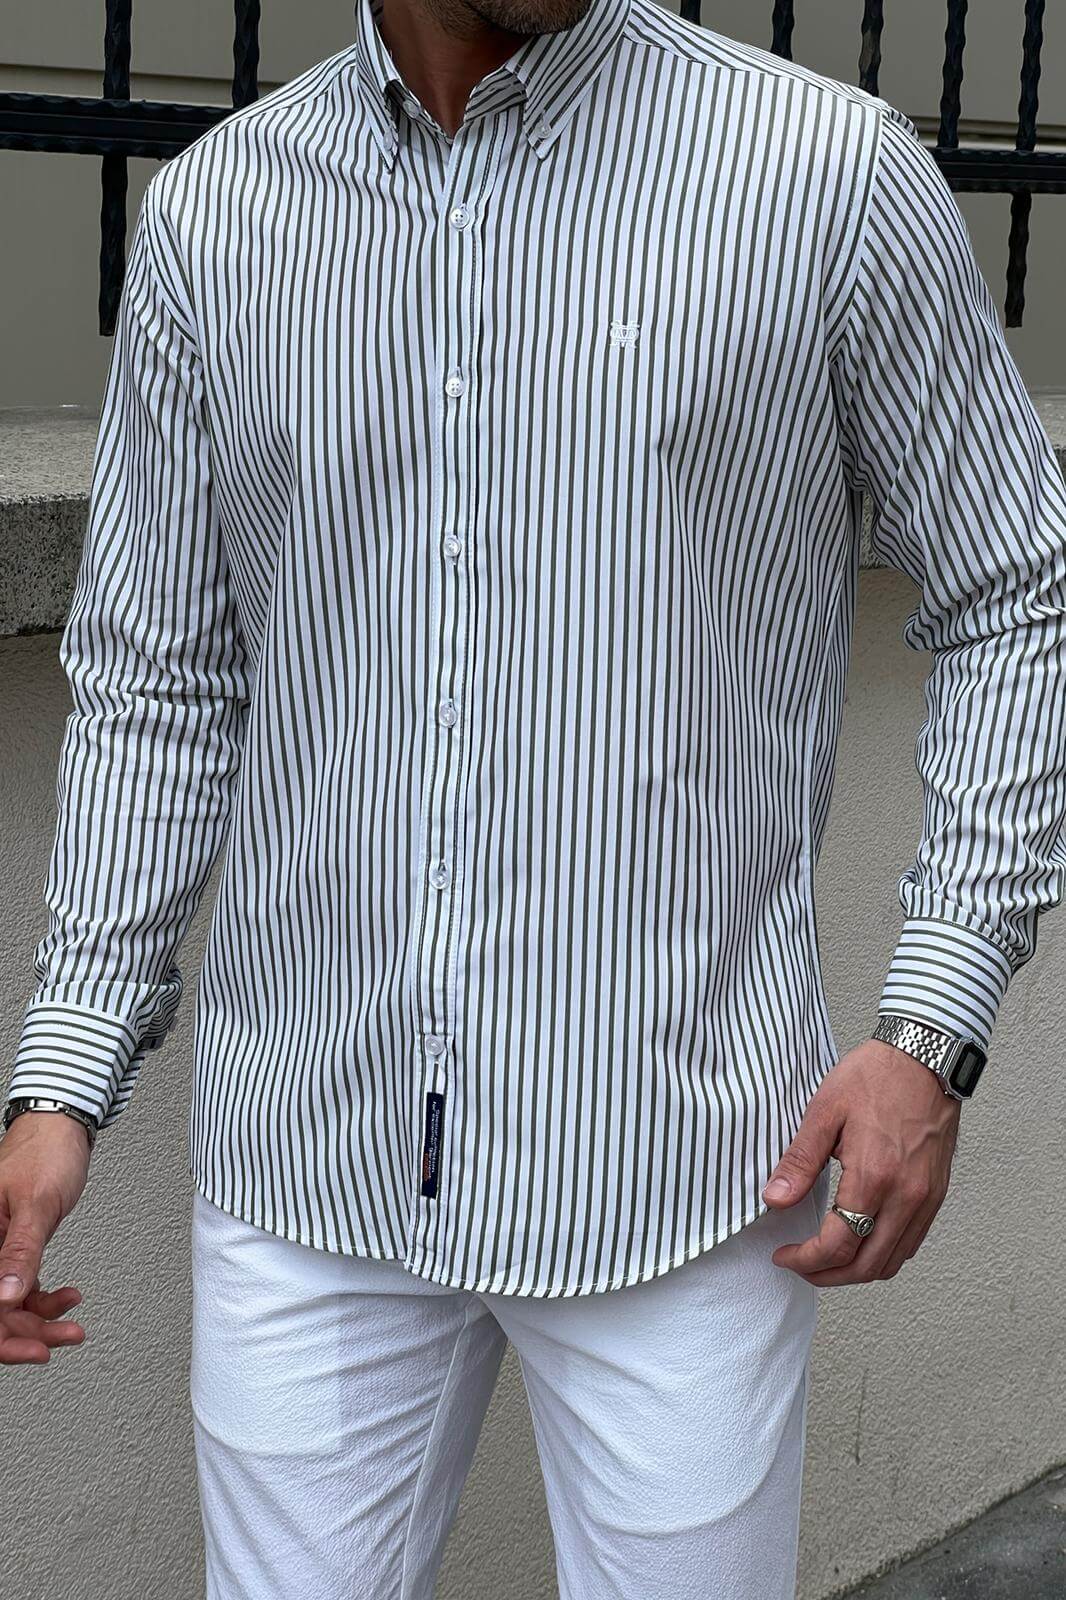 A Slim-Fit Striped White and Green Shirt on display